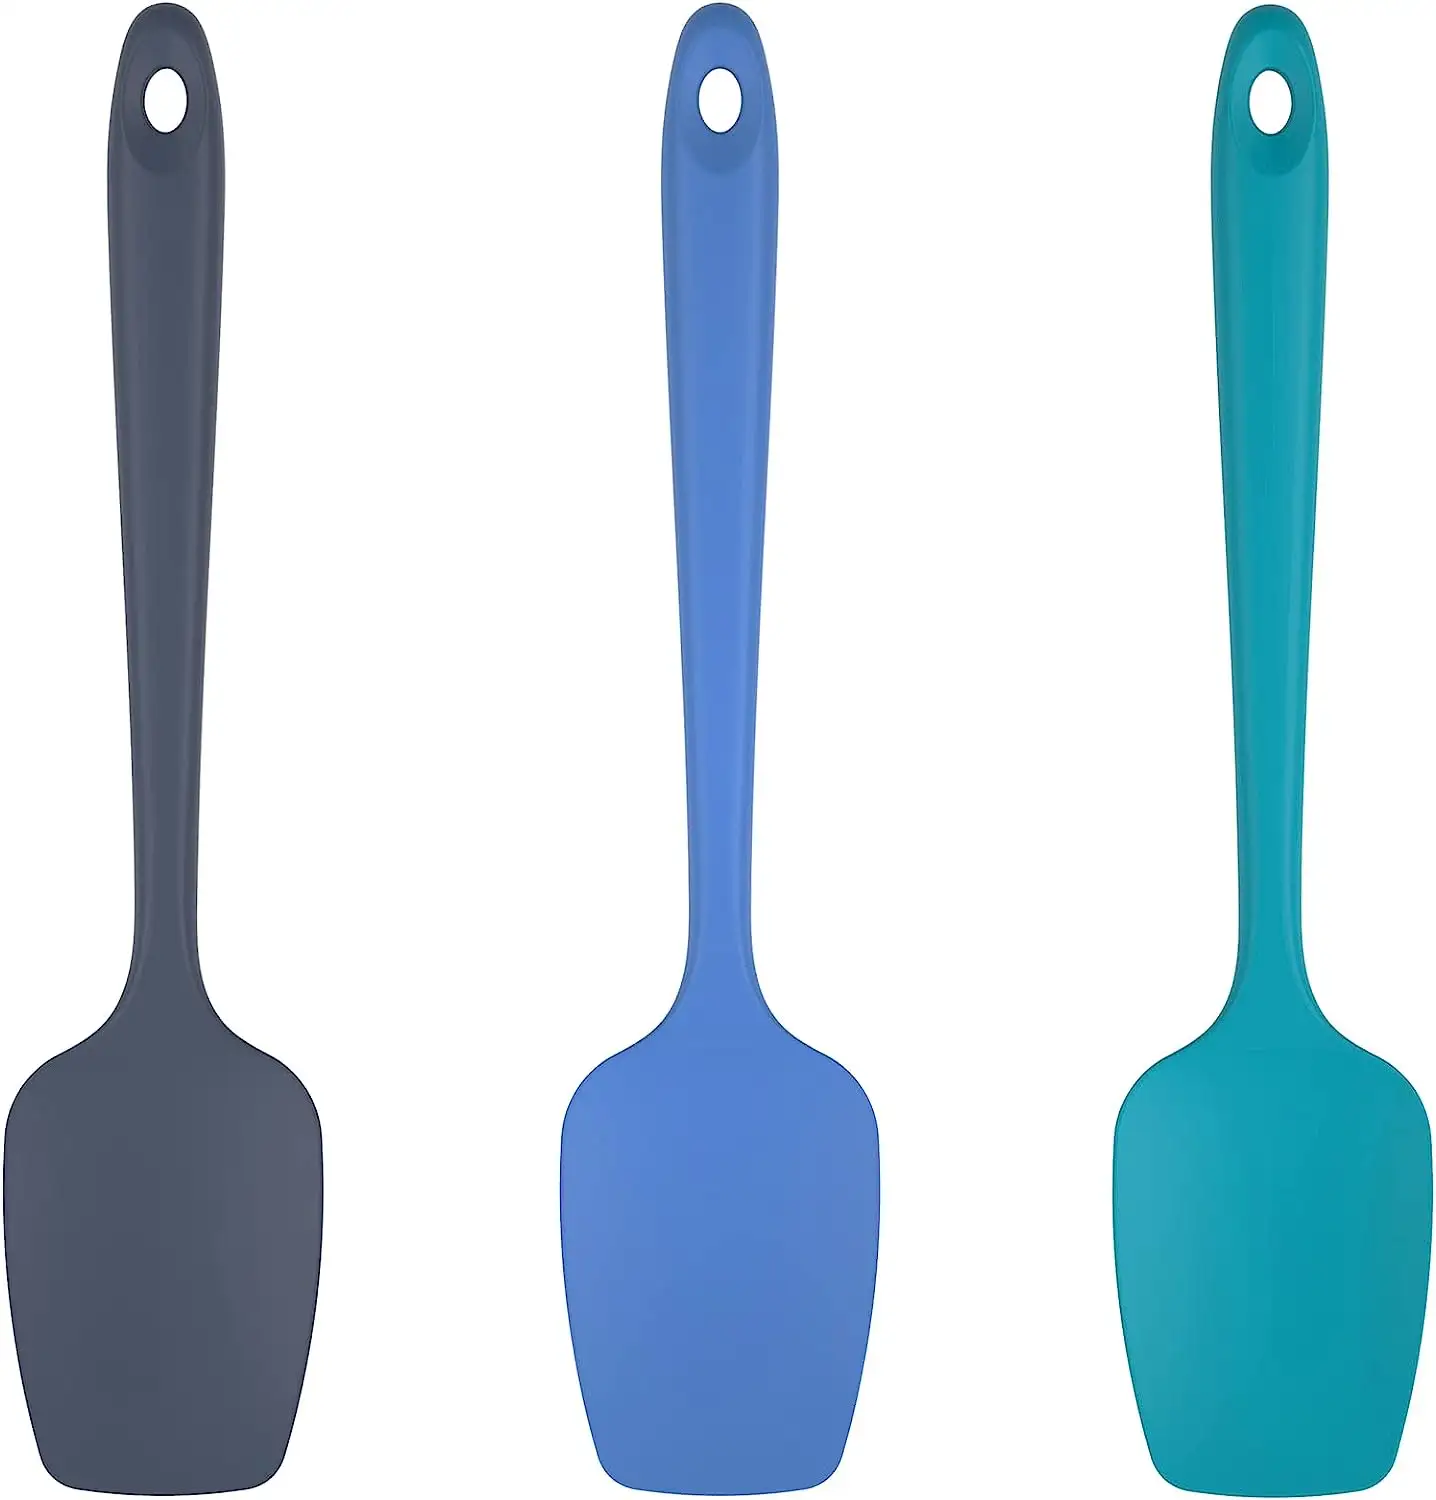 Silicone Spoon Spatula Set, 600F High Heat Resistant BPA-Free Flexible Rubber Scraper, Cooking Mixing Baking Kitchen Utensils